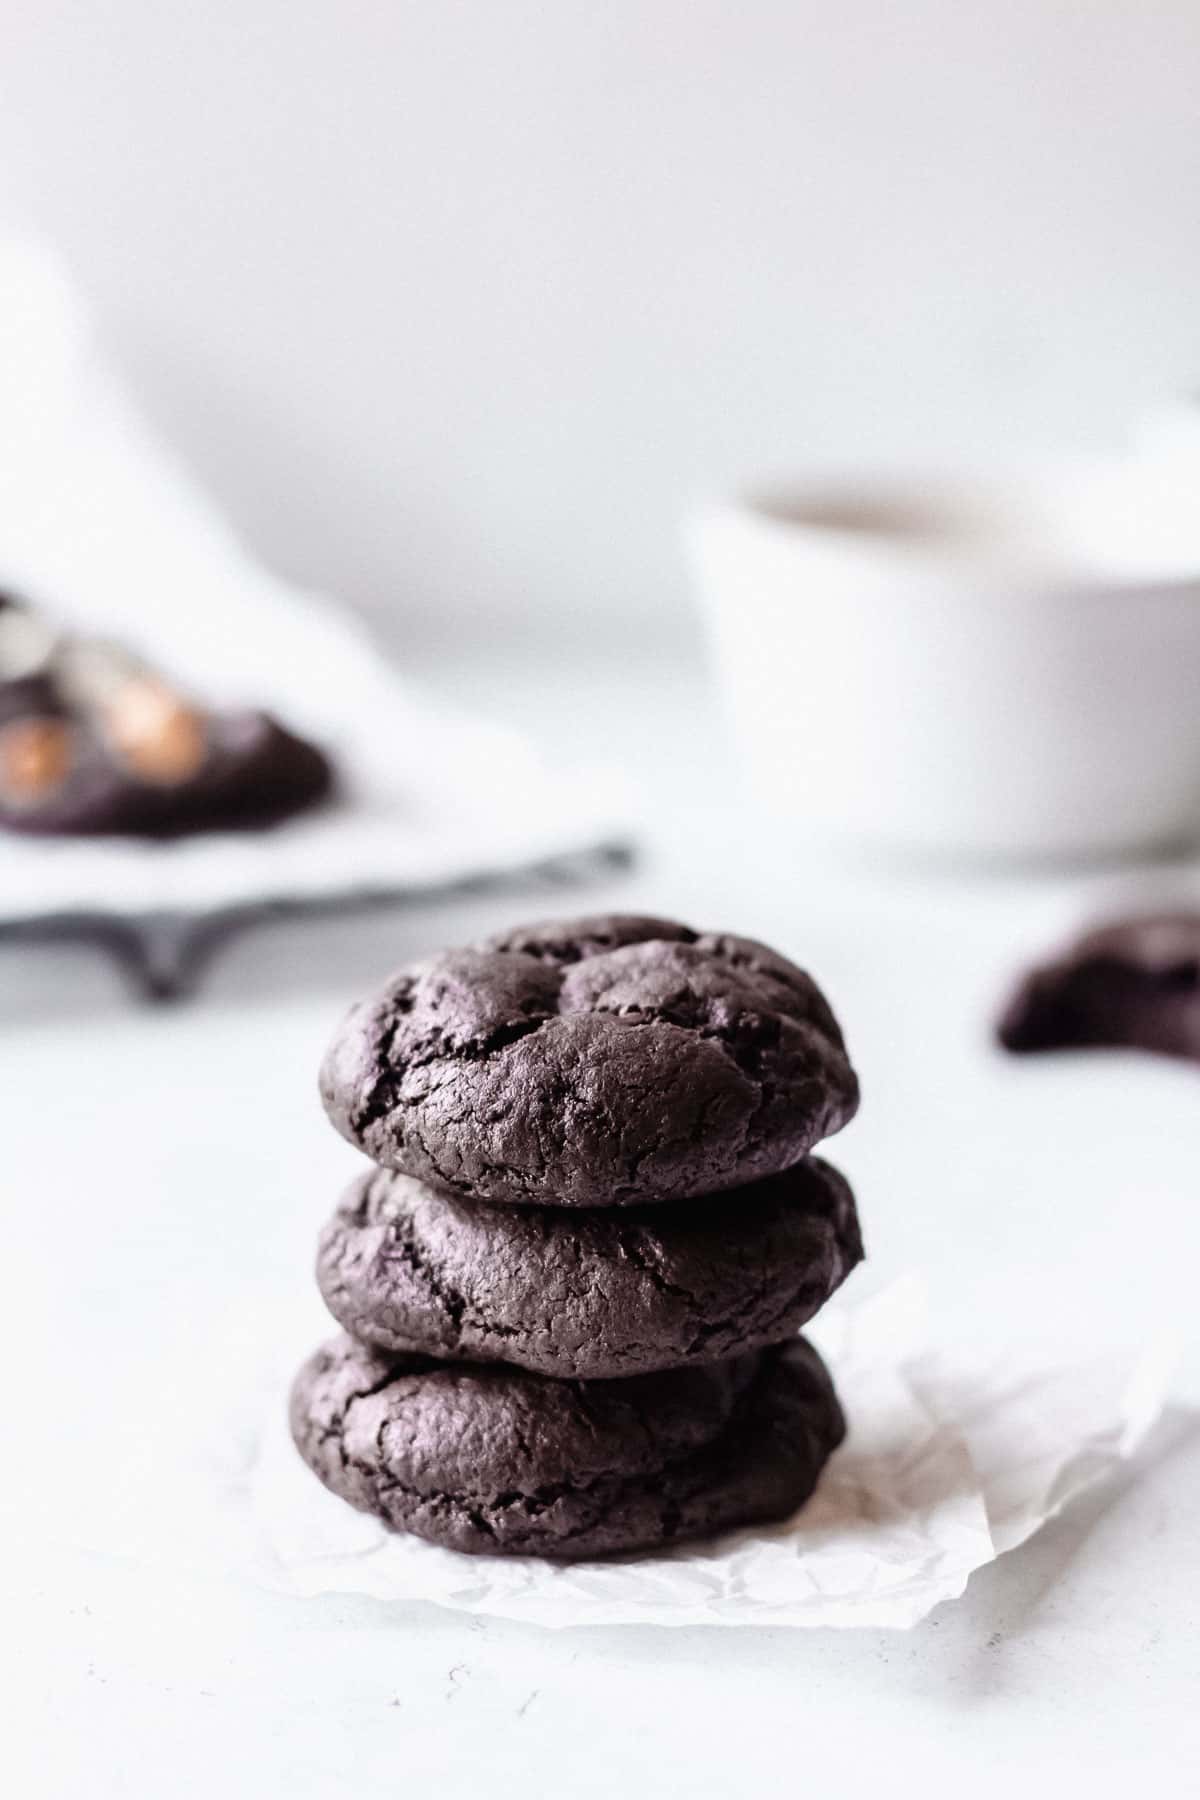 3 dark chocolate cookies stacked on top of each other with more cookies and a white bowl blurred in the background